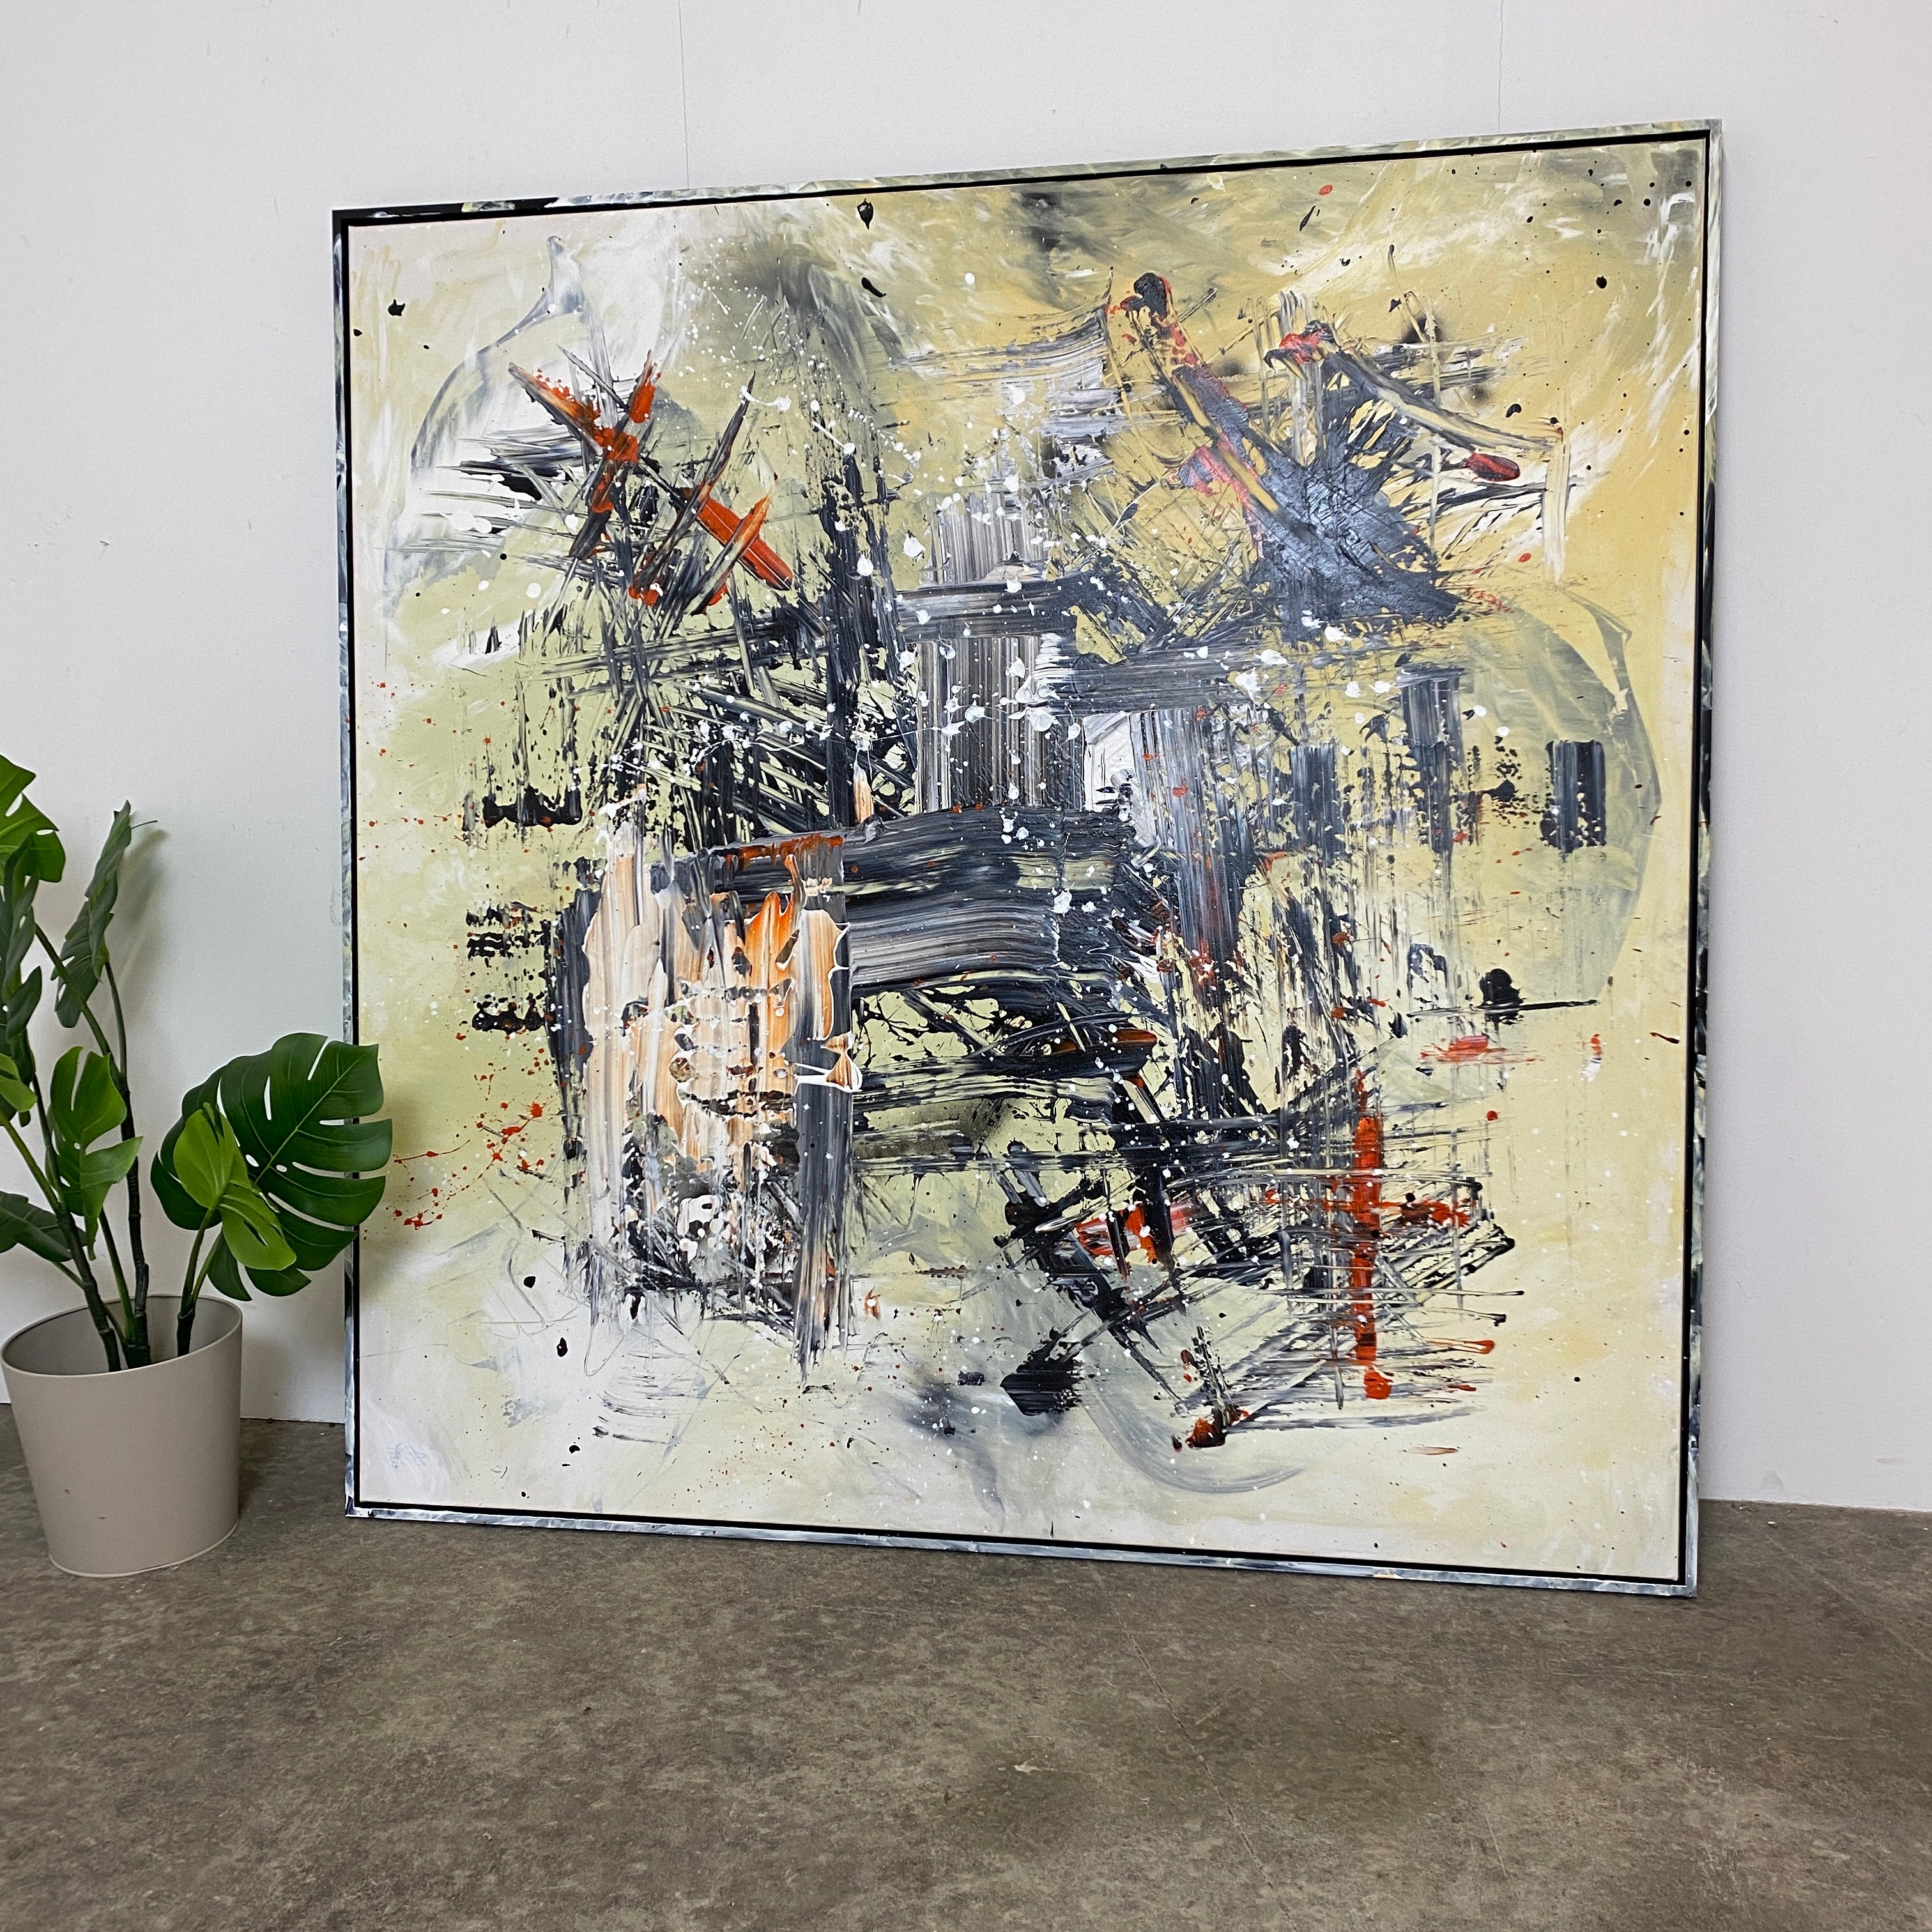 Painting: "Made With Anonym #2" 150 x 150 cm